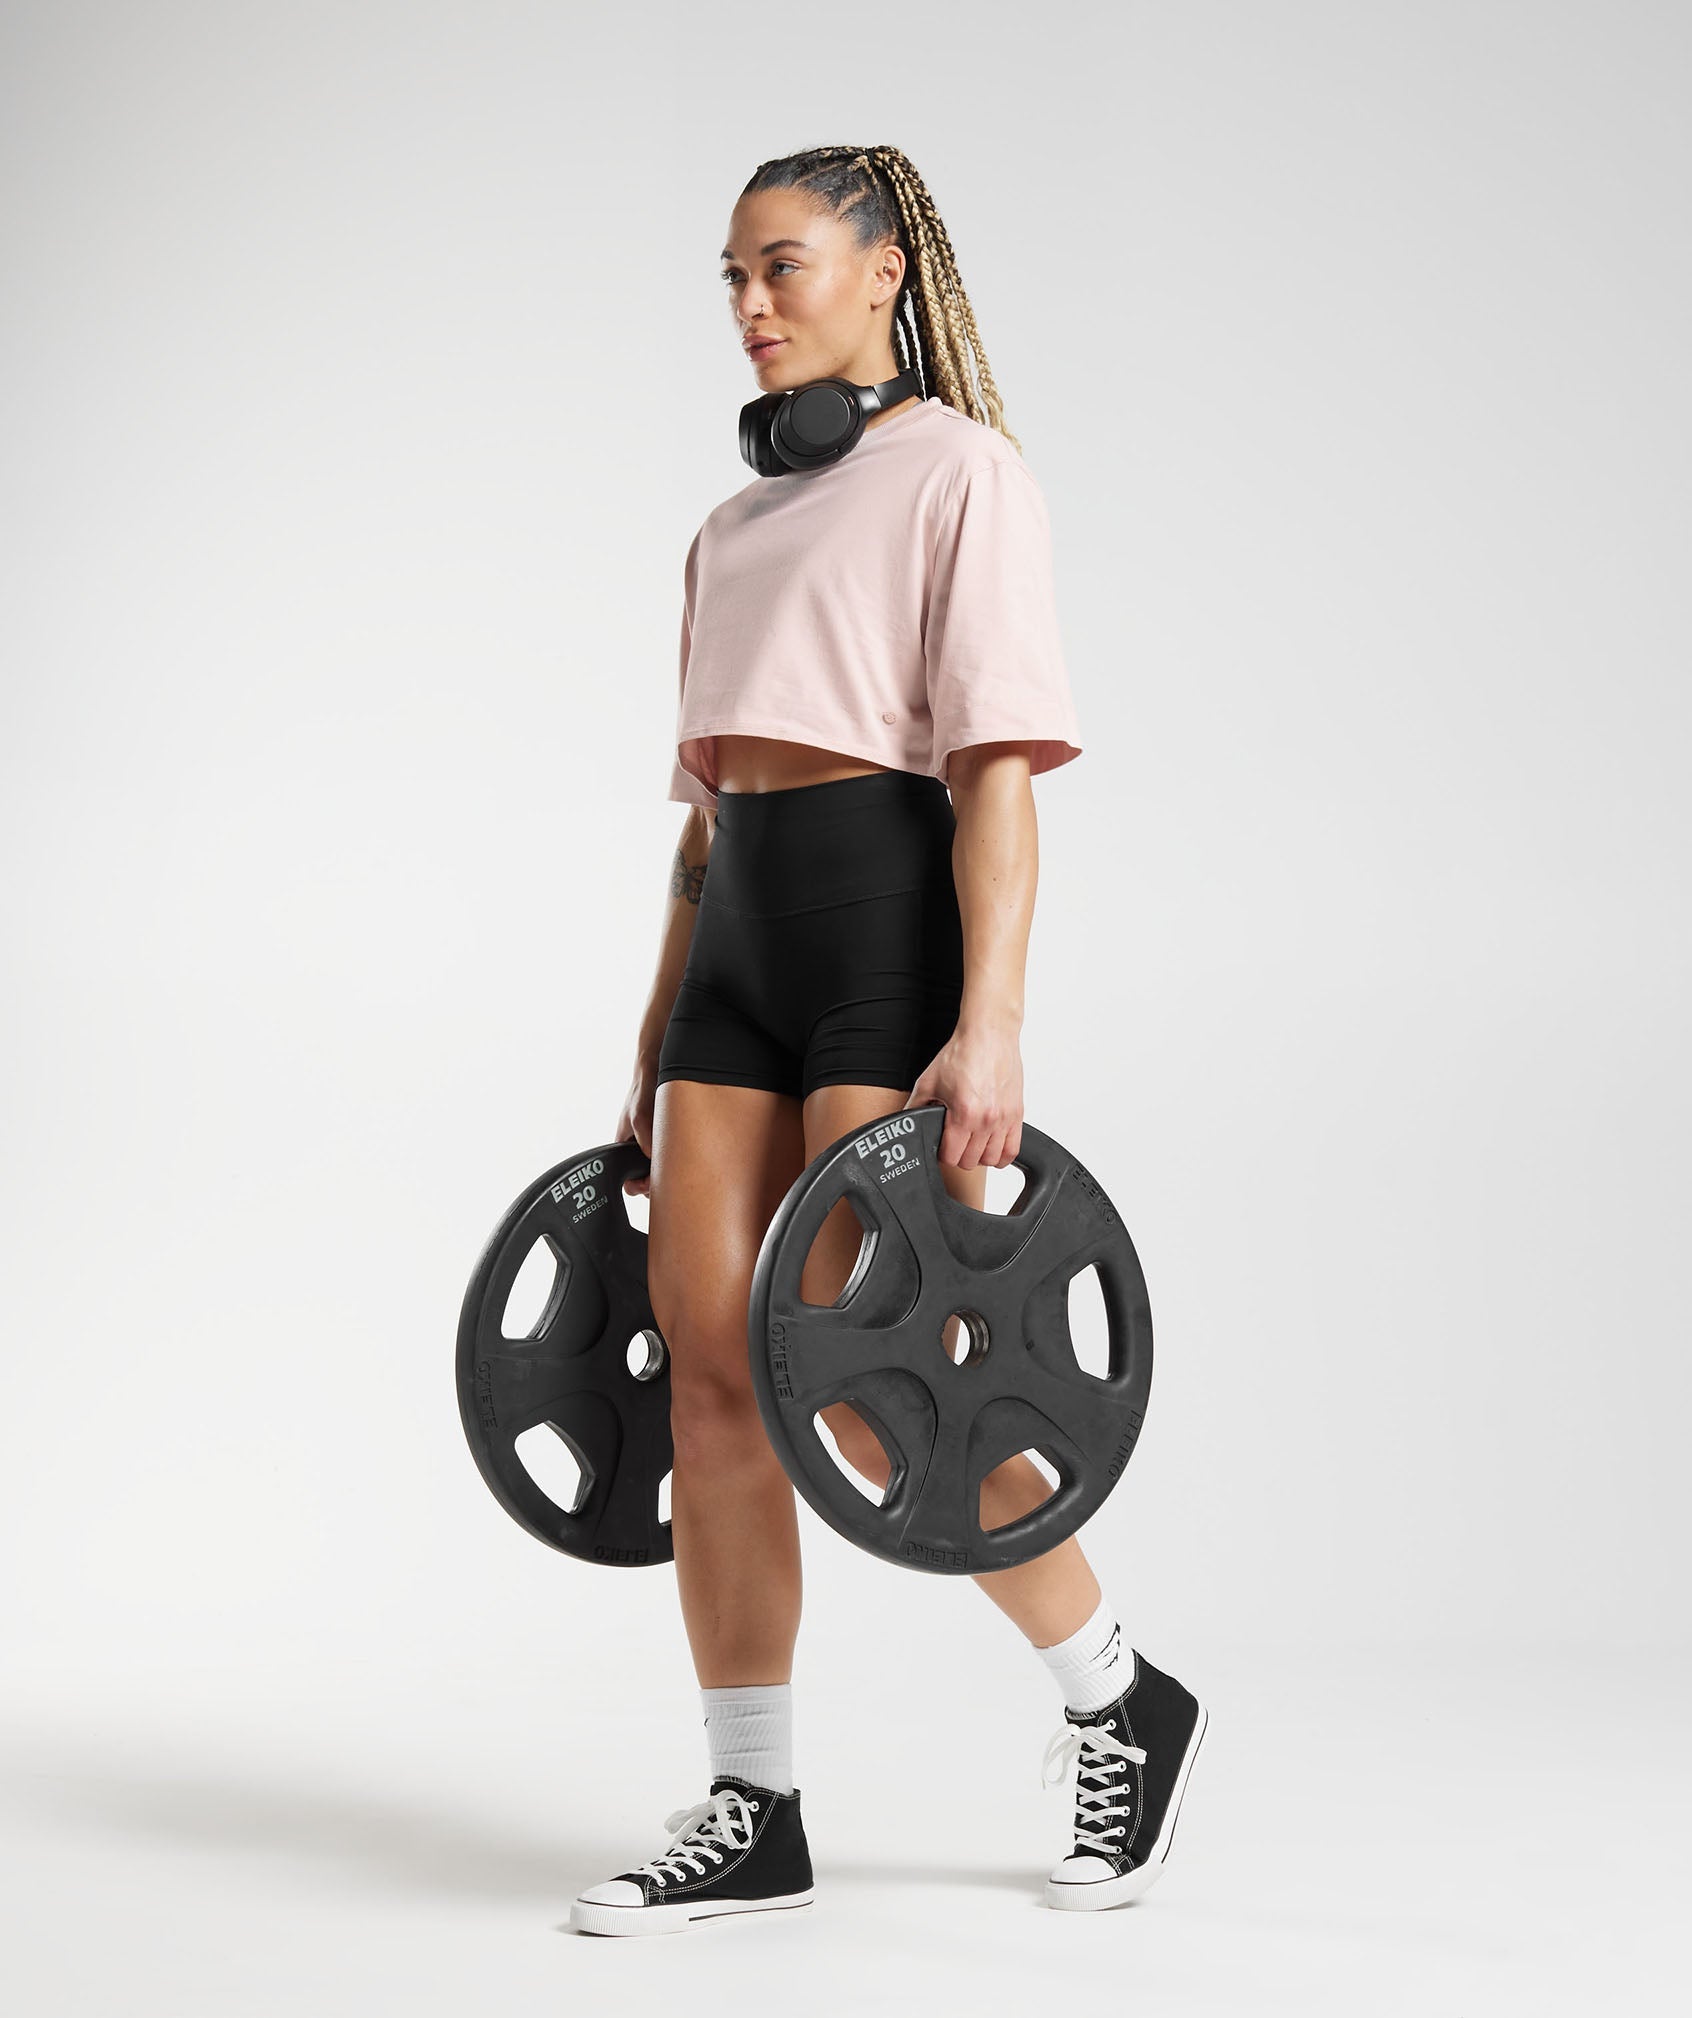 Cotton Boxy Crop Top in Misty Pink - view 4